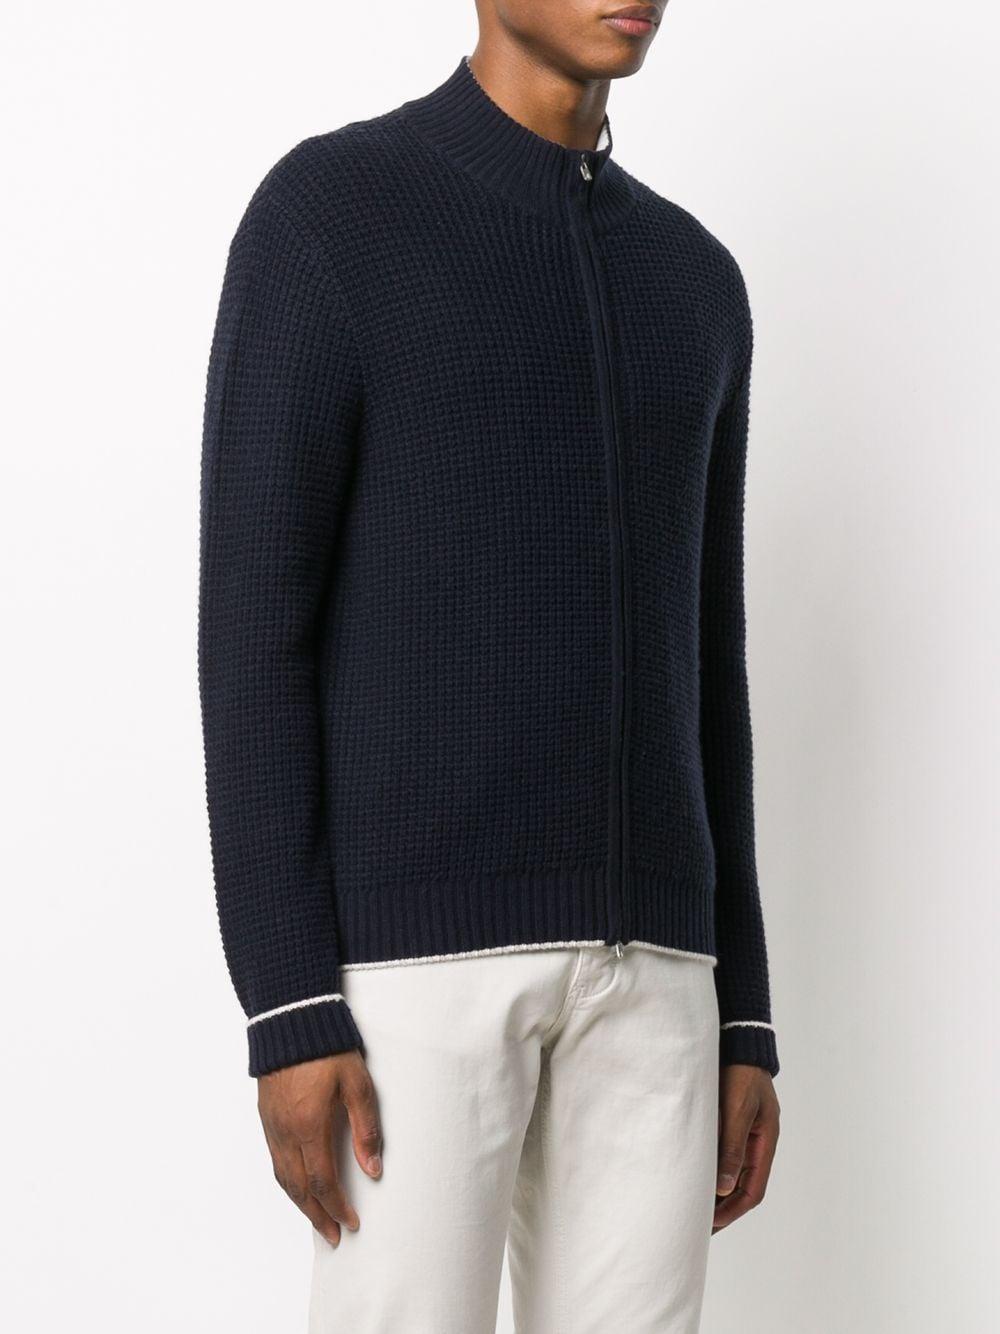 N.Peal Cashmere Wool Waffle Knit Zip-up Jumper in Blue for Men - Lyst